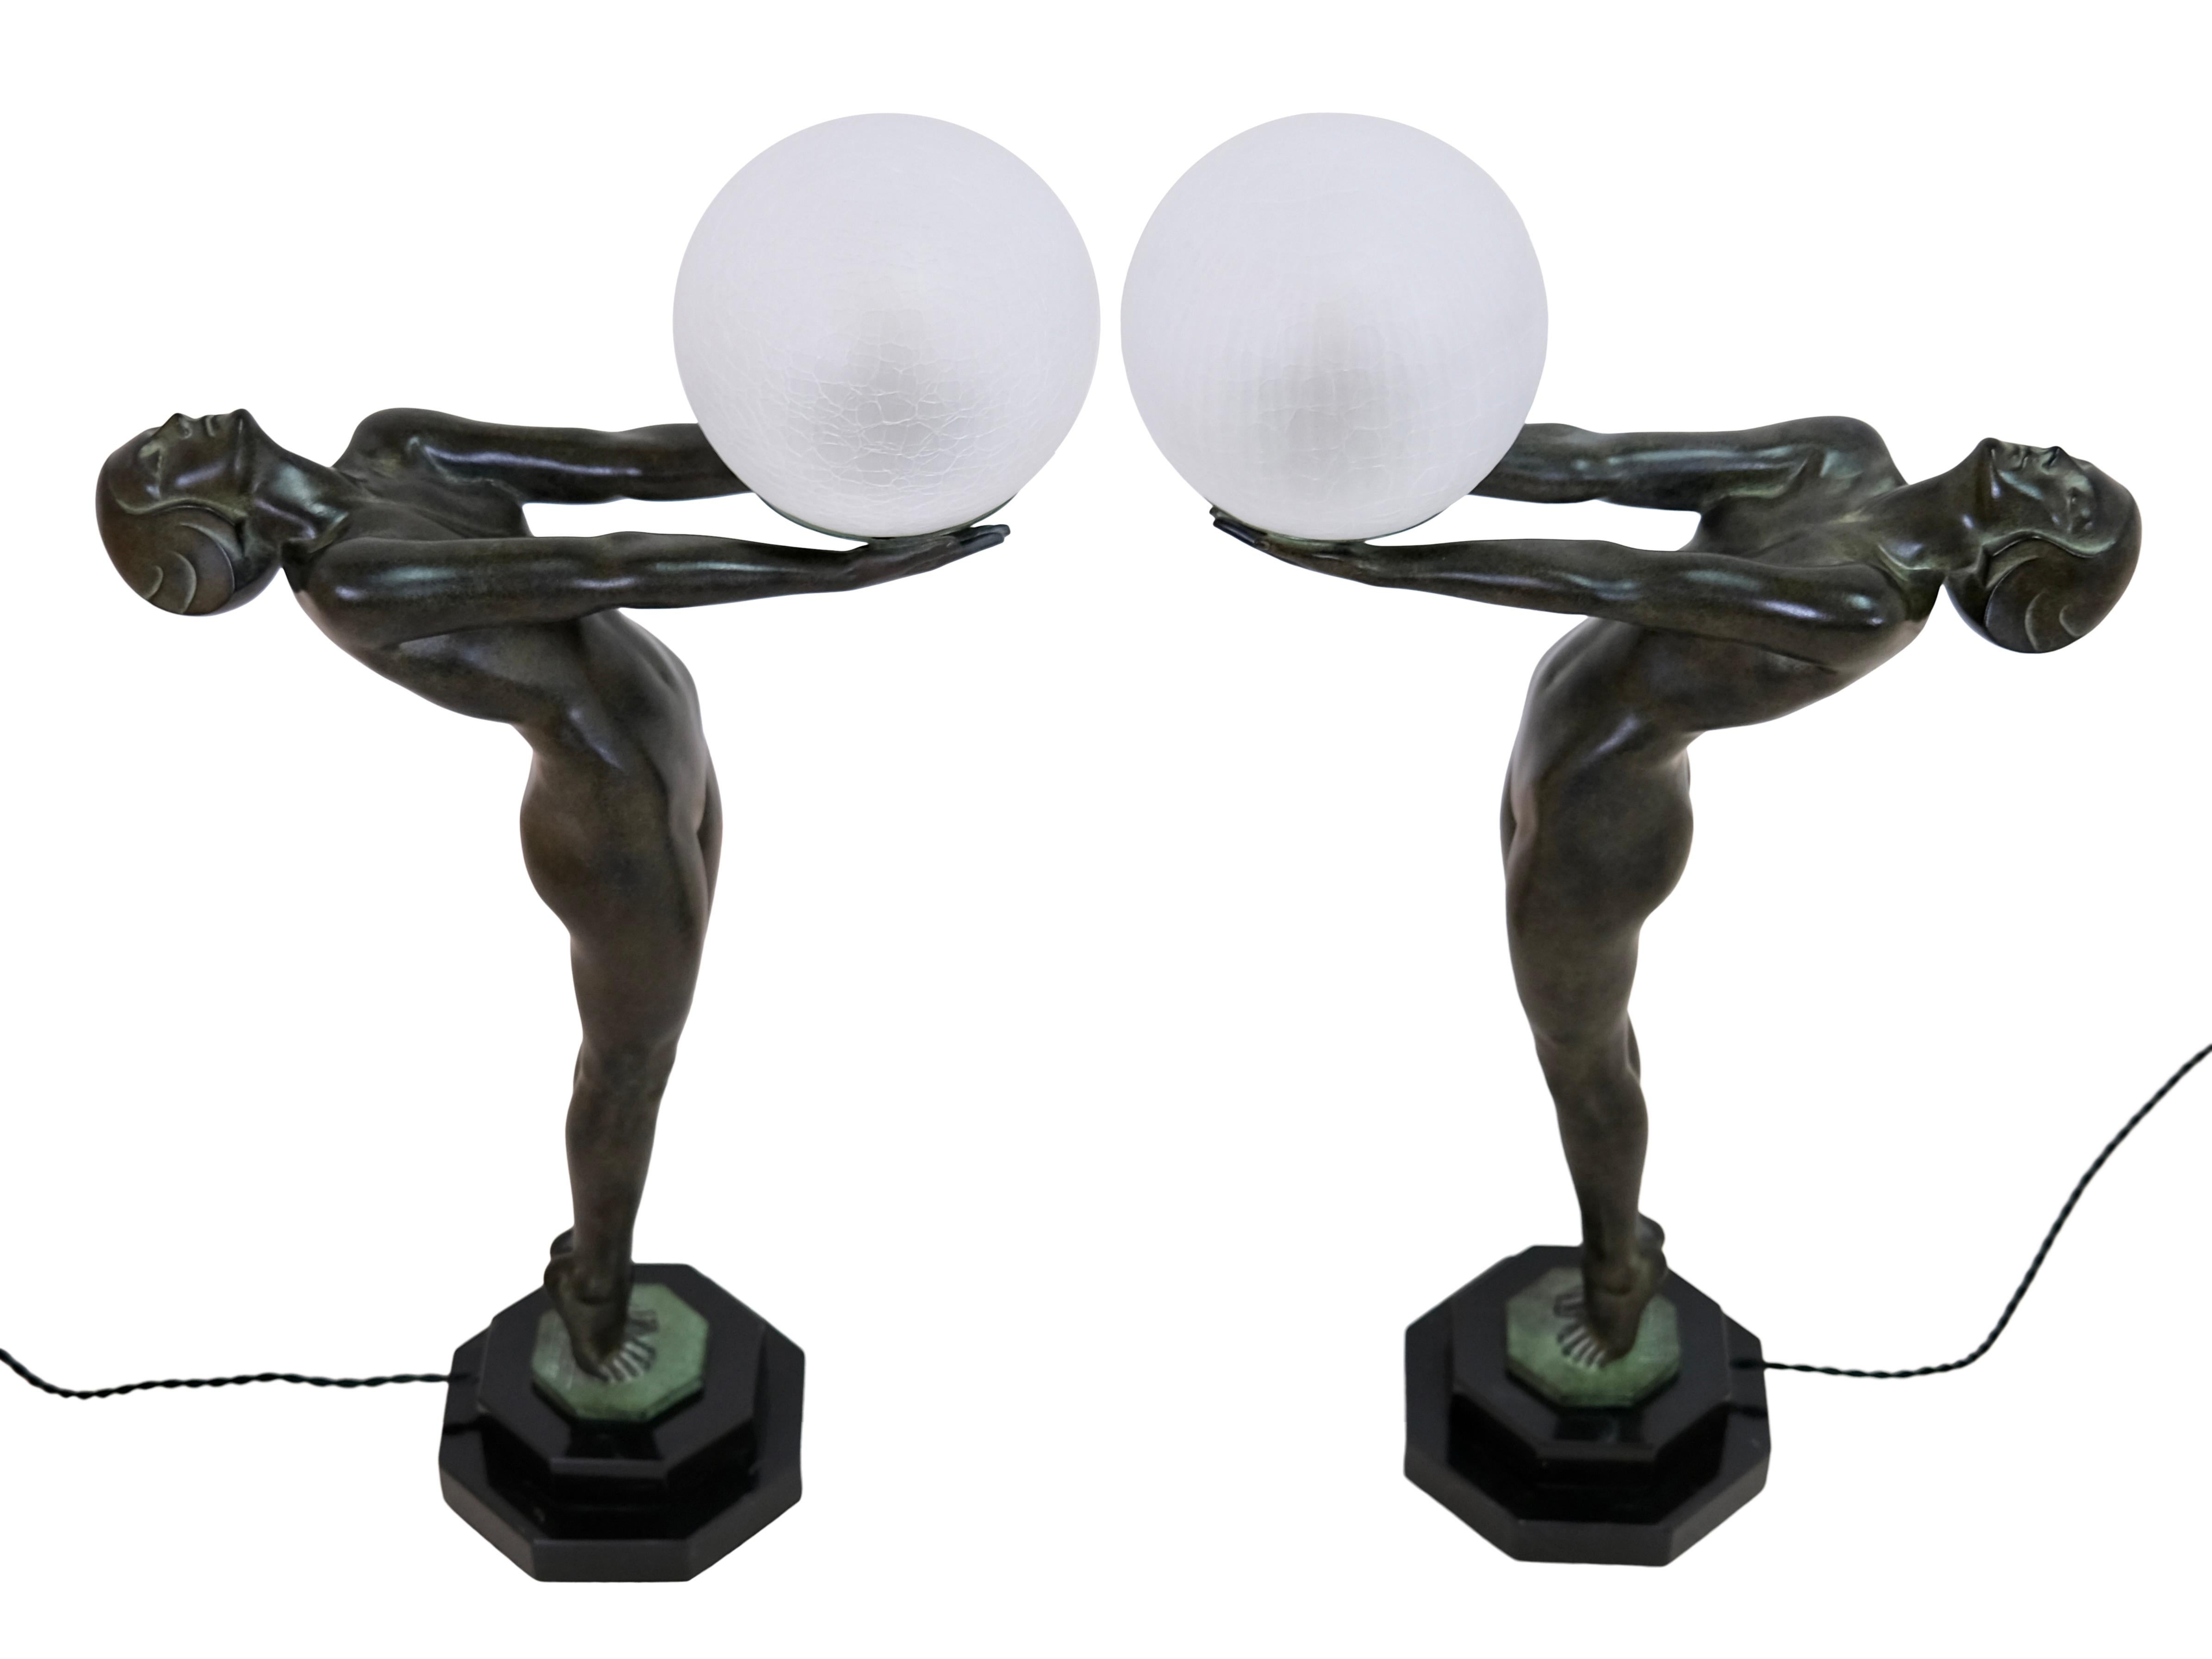 Lumina, Set of 2 
Famous, very decorative Art Deco object. 
Slightly smaller than the famous Clarté 
Designed in France during the roaring 1920s by “Max Le Verrier” (1891-1973) 
Original Max Le Verrier, signed 
Art Deco style, France

Lighted